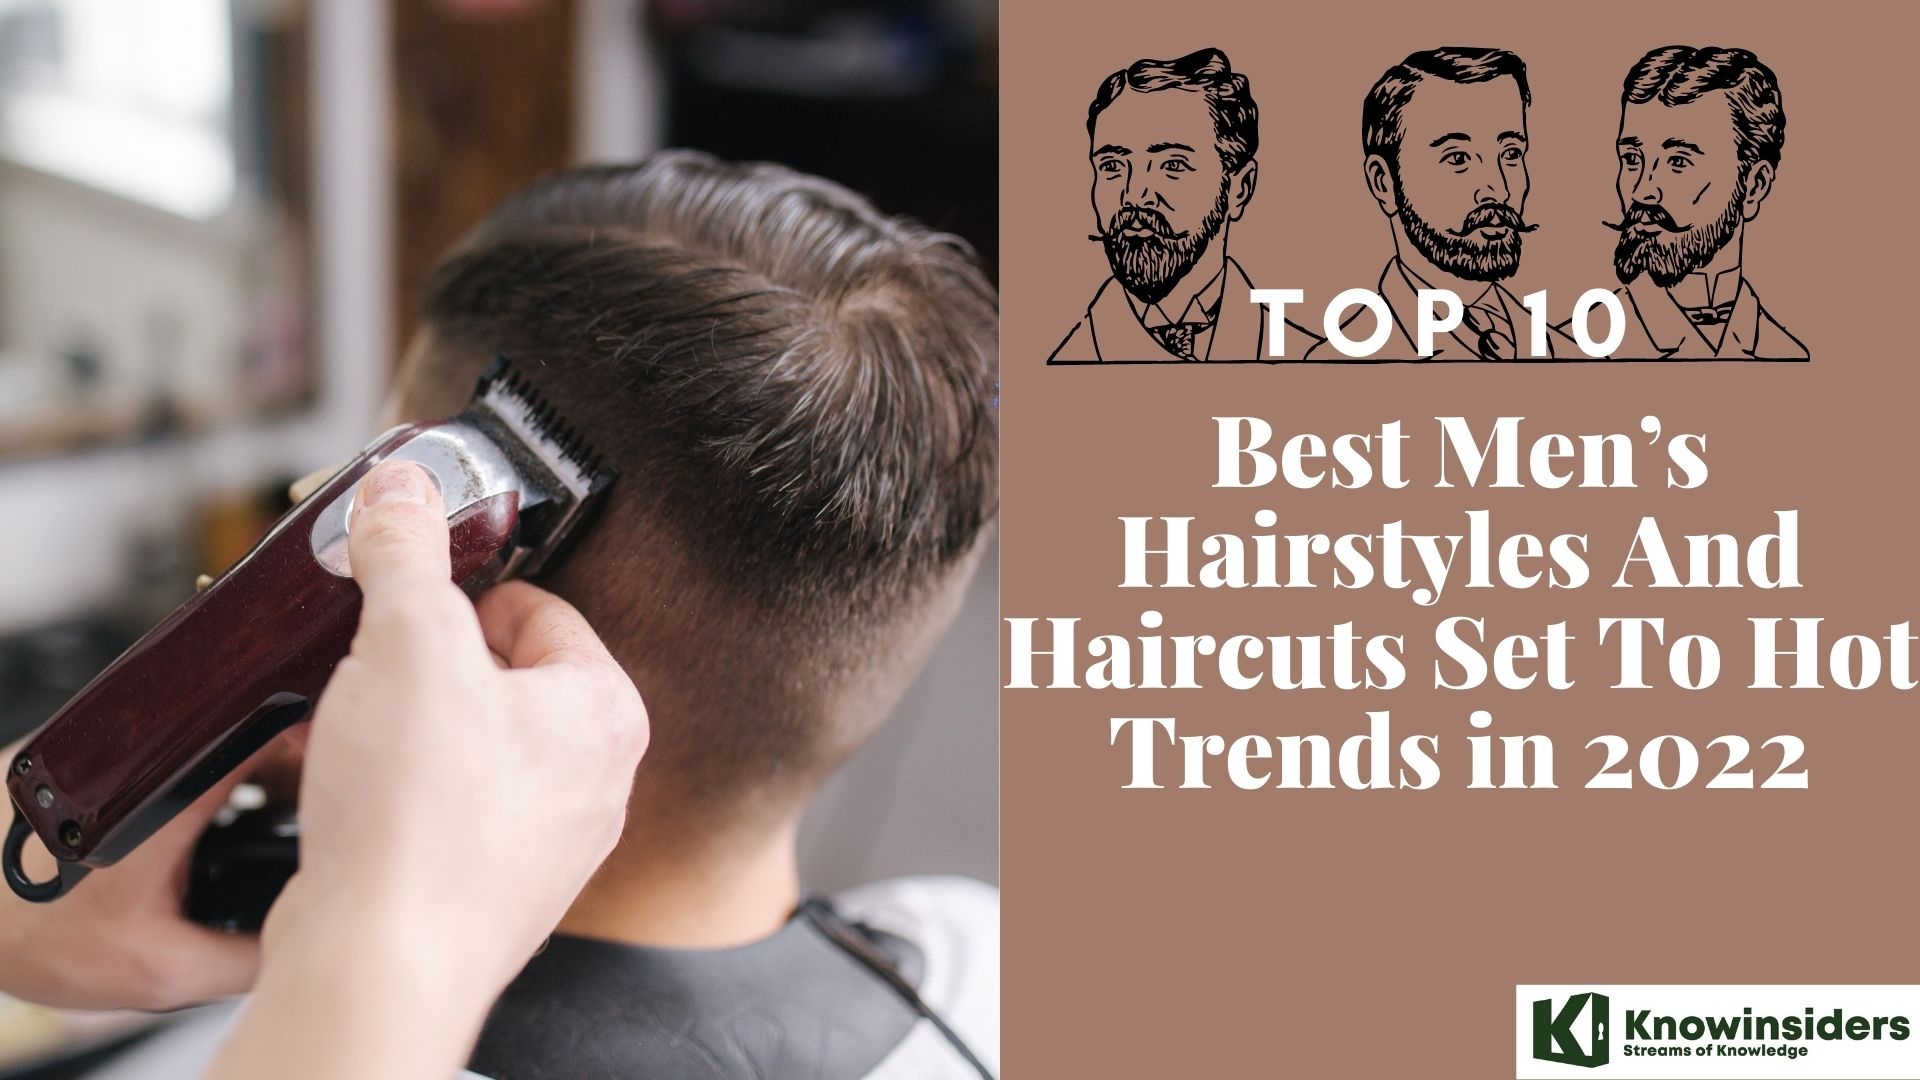 Top 10 Best Men’s Hairstyles And Haircuts Set To Hot Trends in 2022